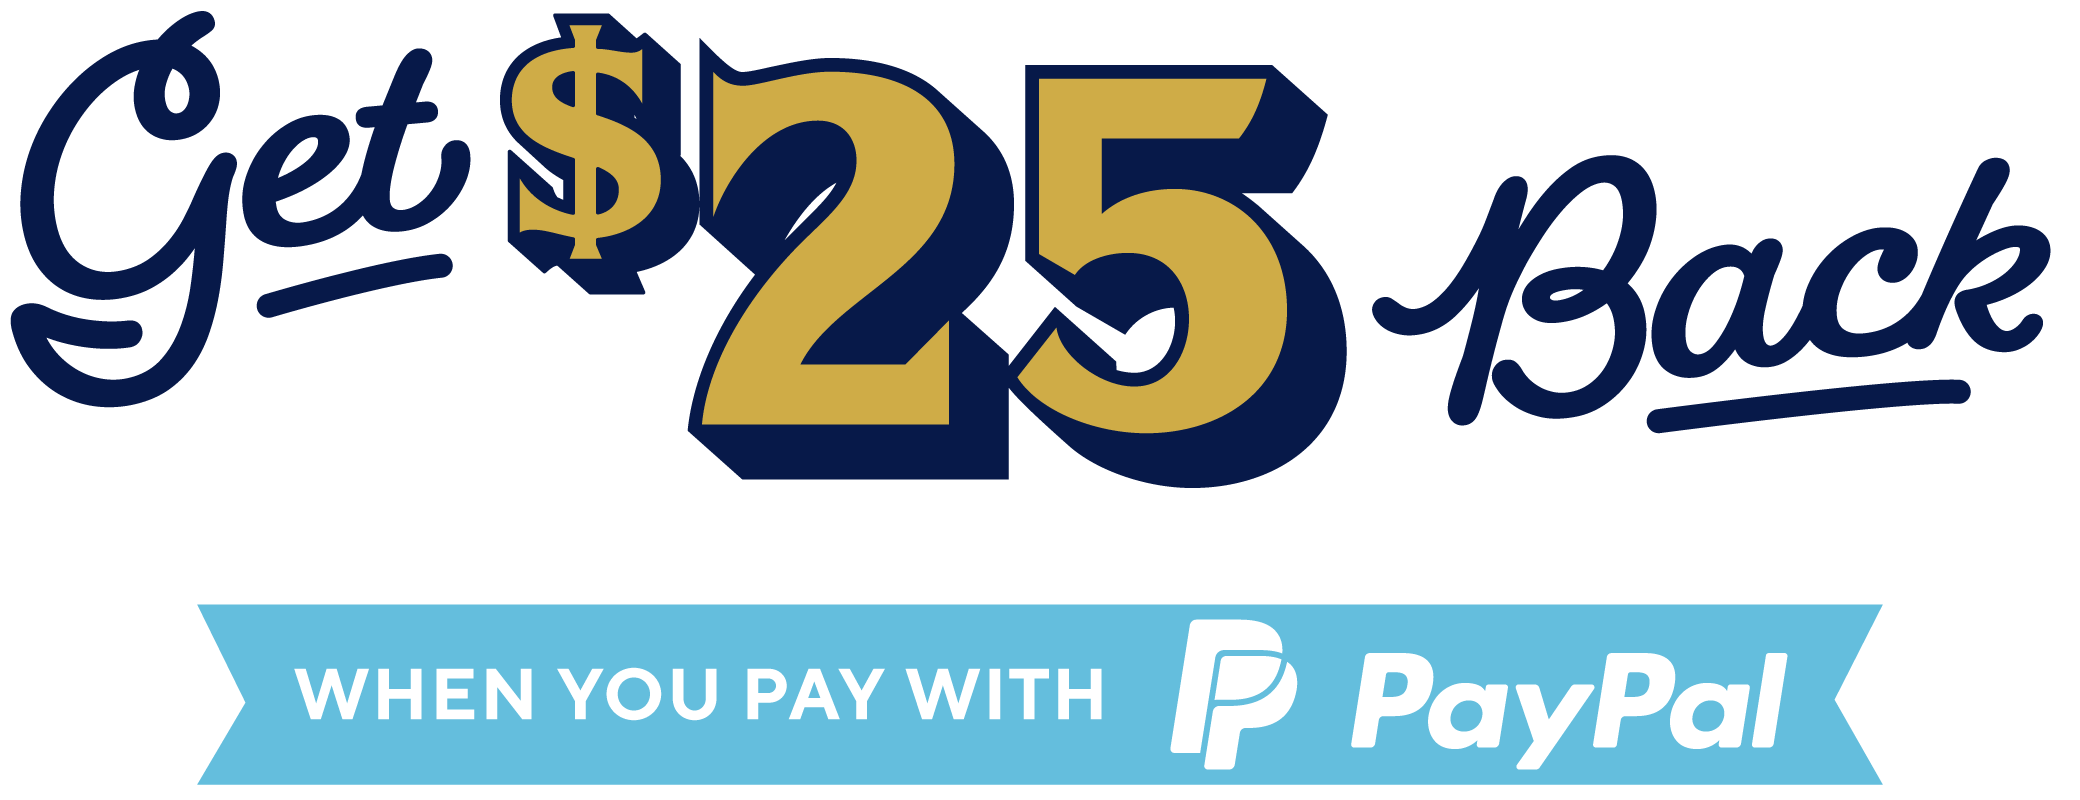 25 by 25 We Accept PayPal Logo - PayPal x Innings